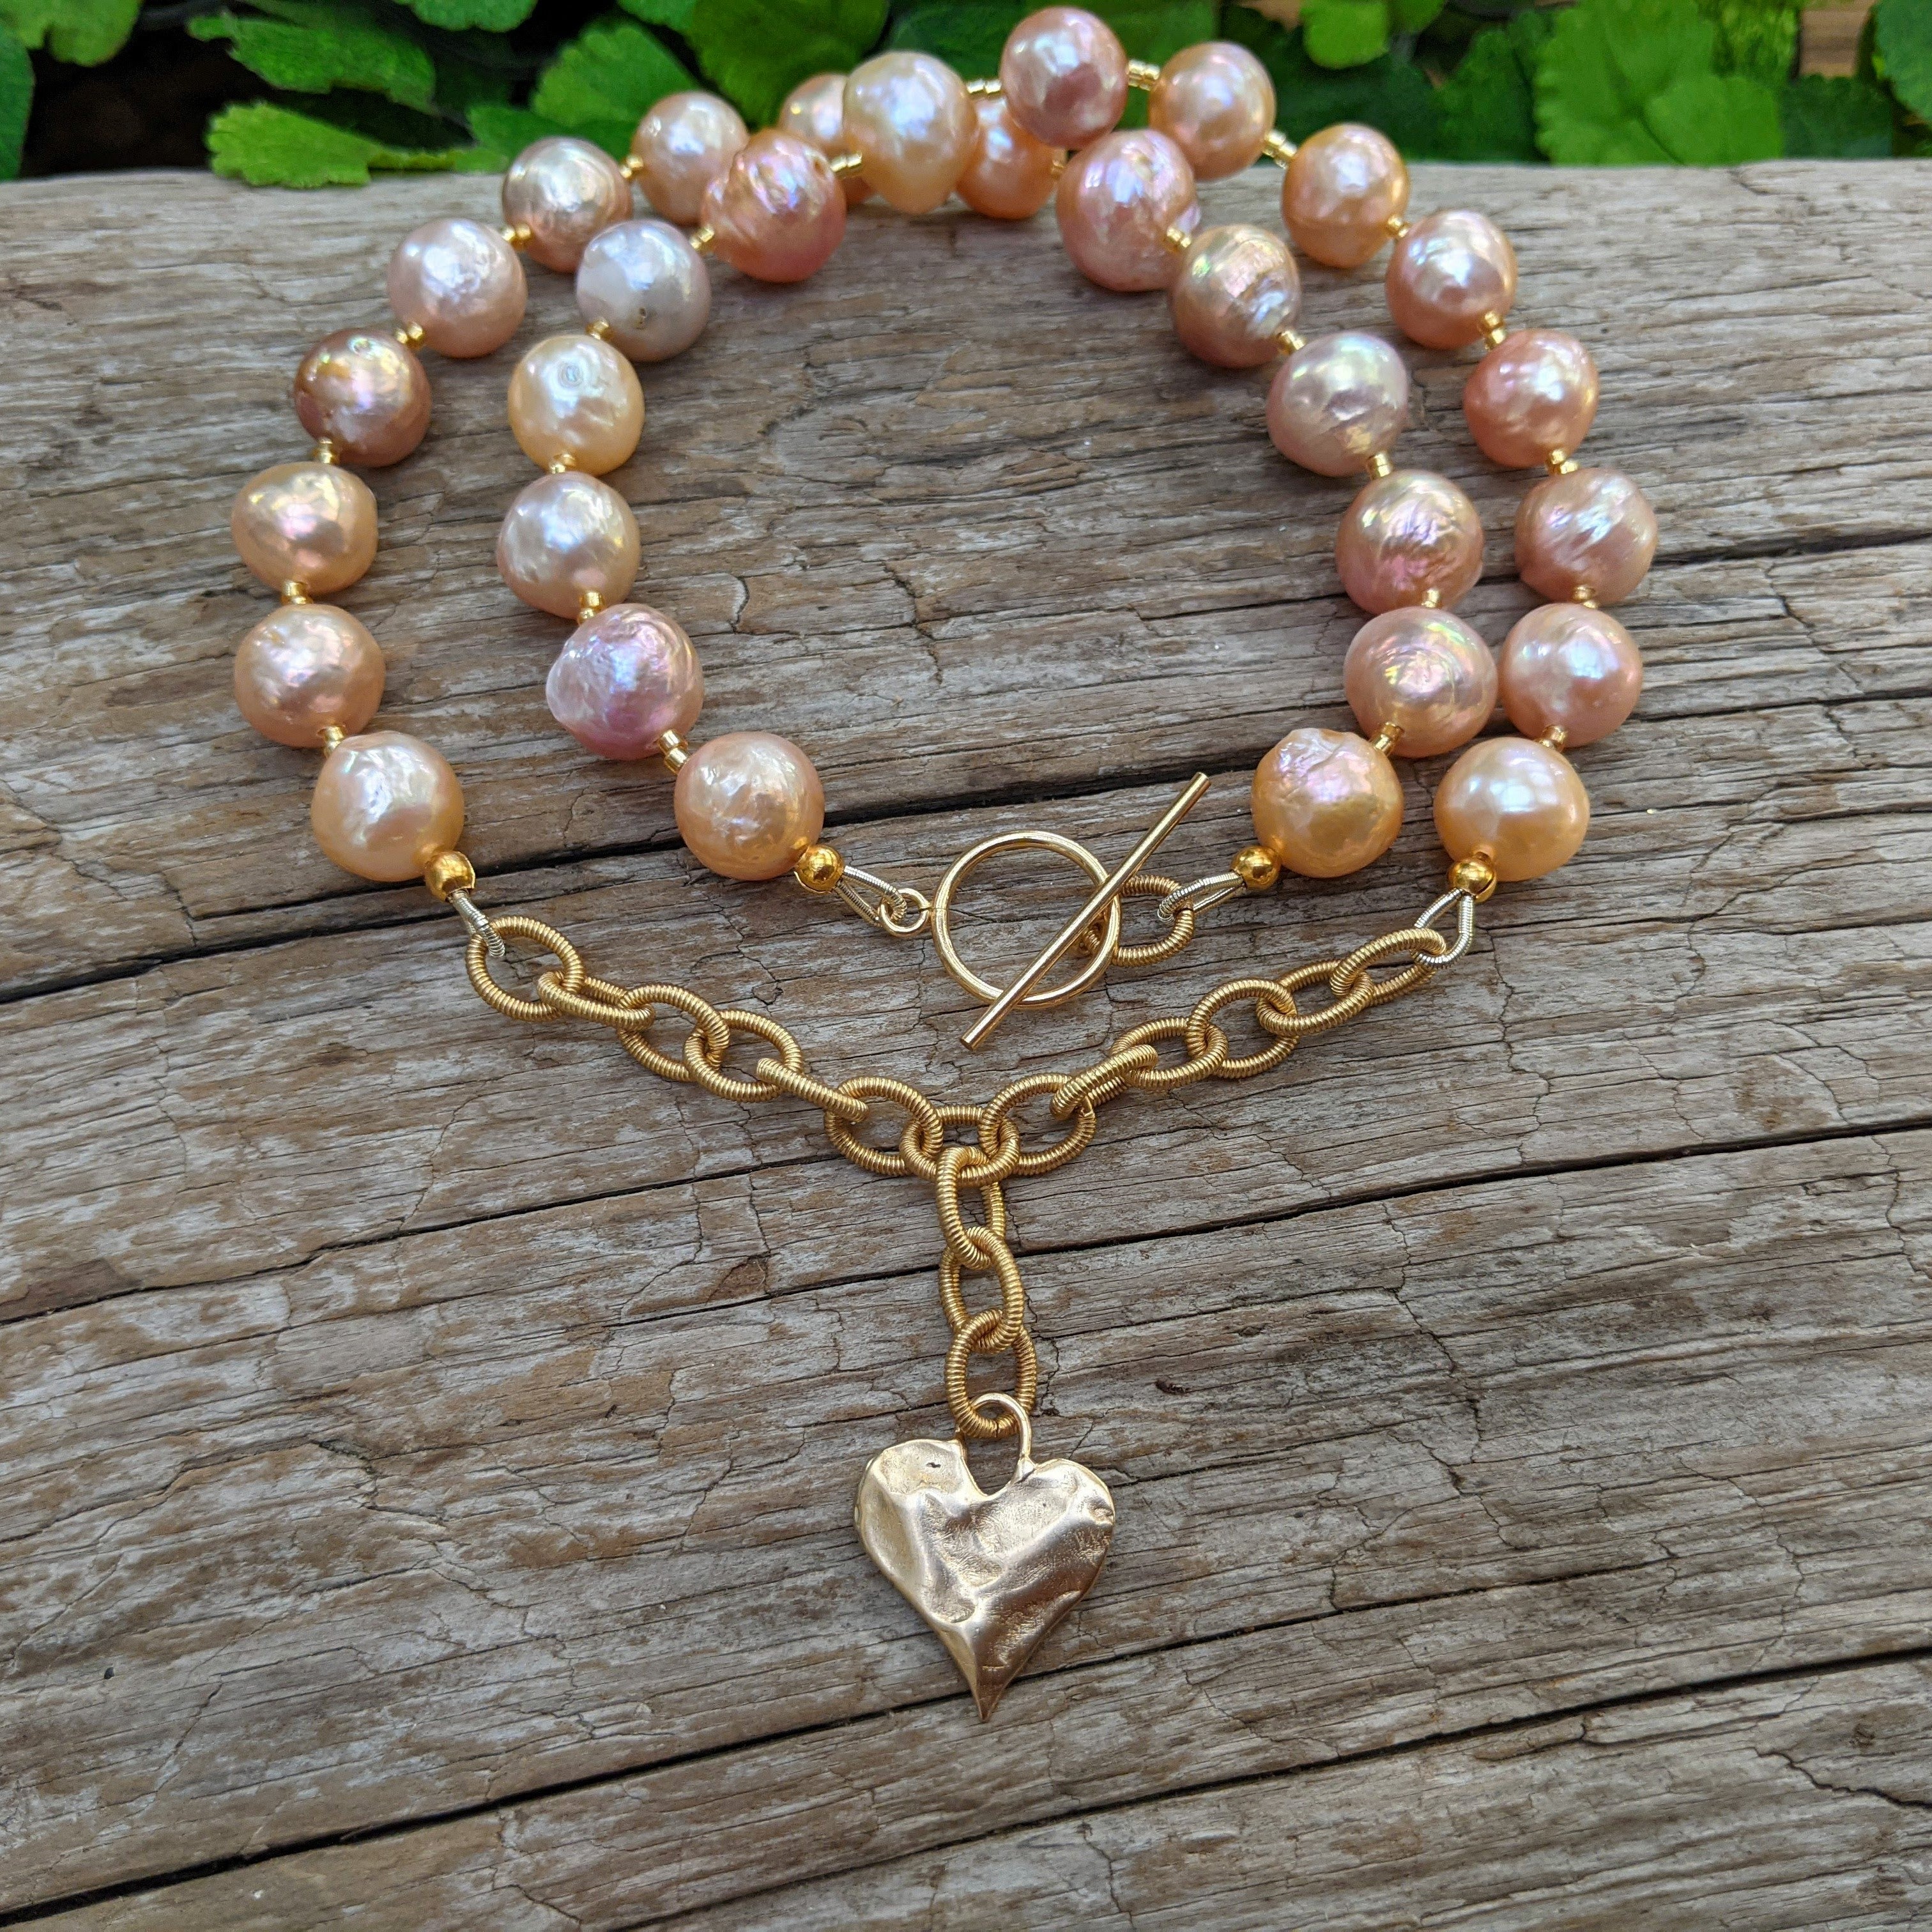 Pink Edison pearl necklace with gold bronze heart pendant. Handcrafted by Aurora Creative Jewellery.